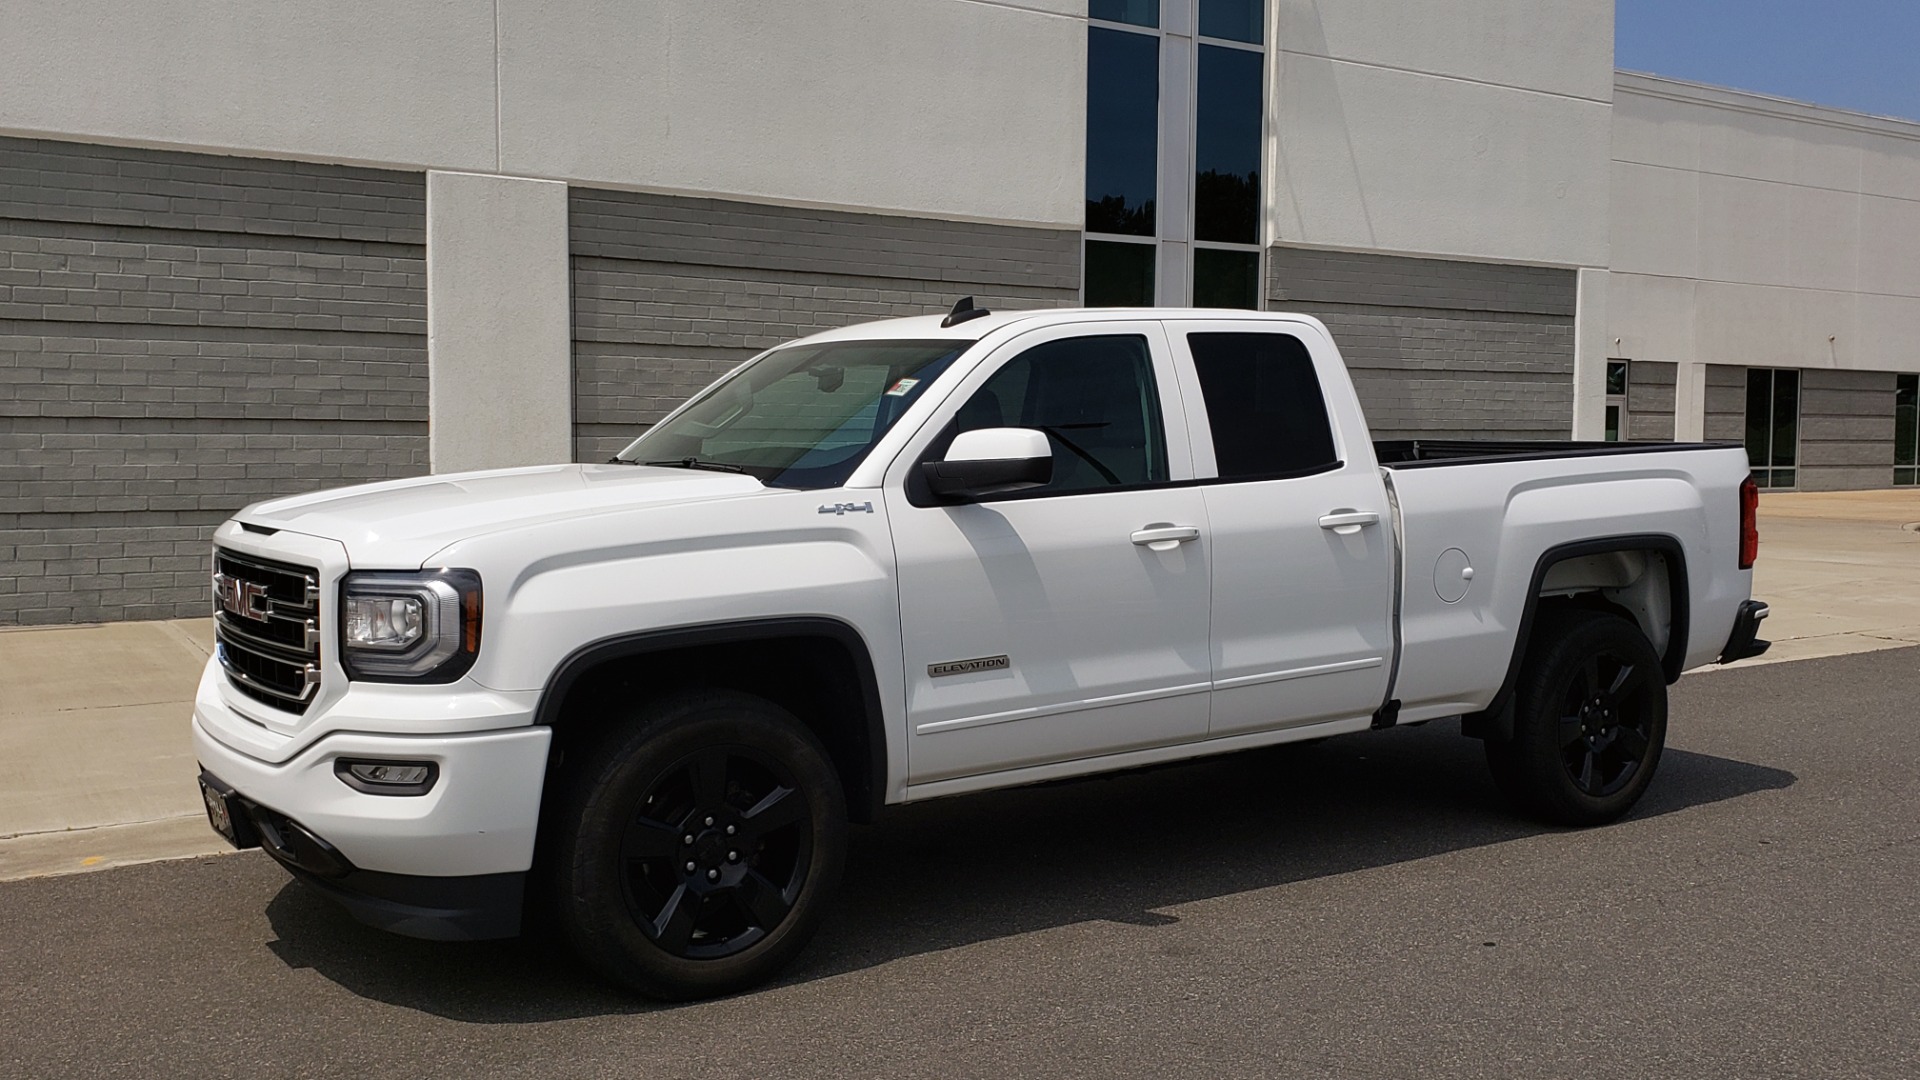 Used 2018 GMC SIERRA 1500 4WD DOUBLECAB / 143.5IN / 5.3L V8 / 6-SPD AUTO / REARVIEW for sale Sold at Formula Imports in Charlotte NC 28227 4